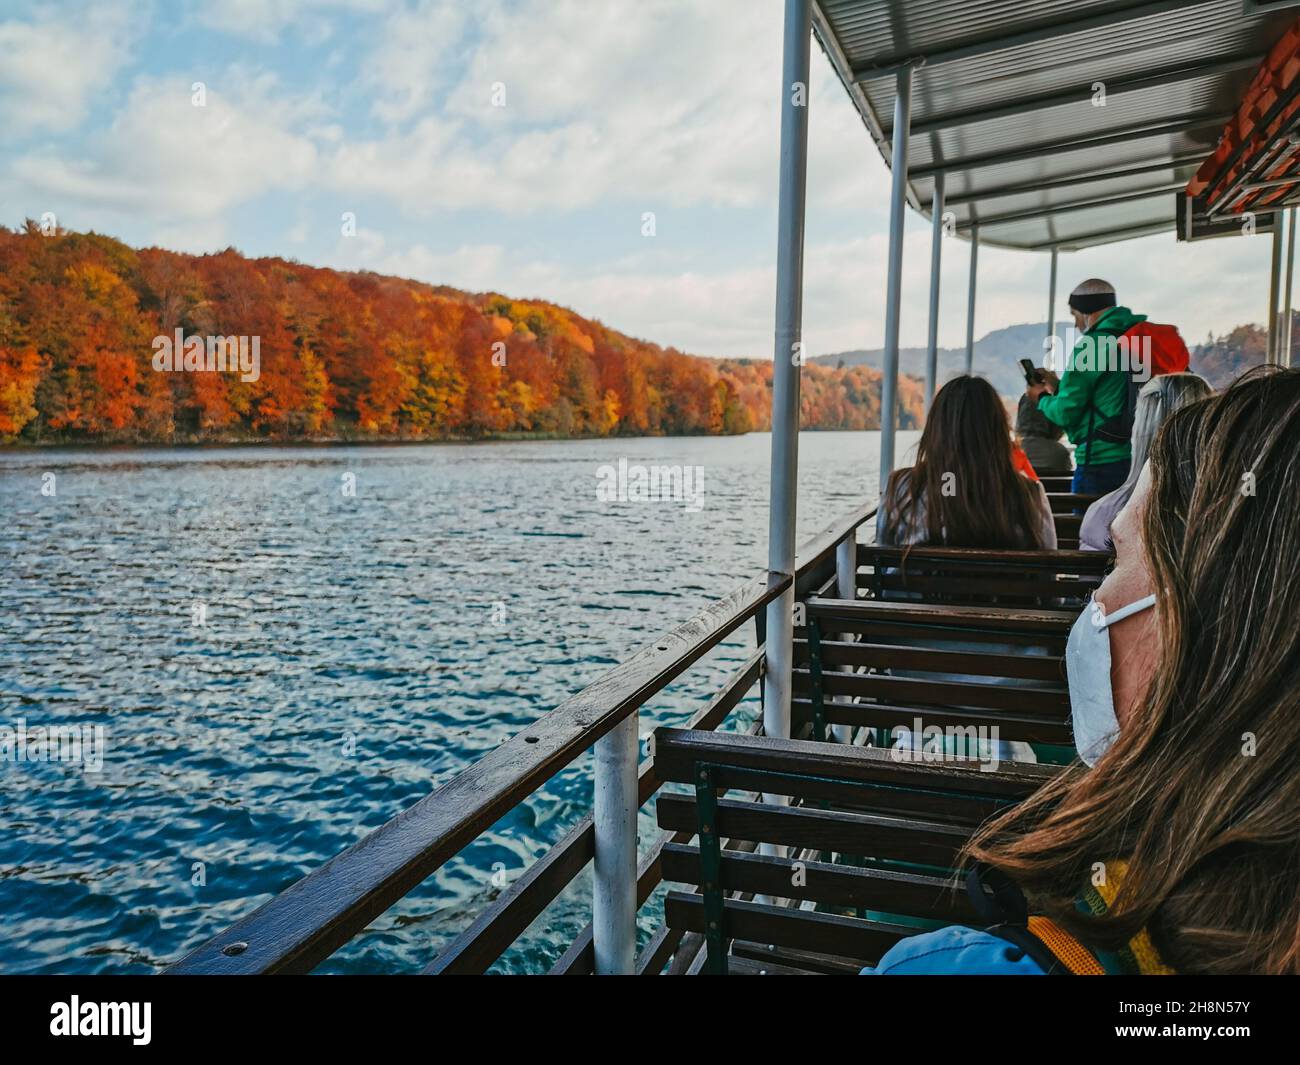 PLITVICE, CROATIA - Oct 29, 2021: A group of people on a tourist boat at famous Plitvice Lakes National Park in Croatia in autumn Stock Photo